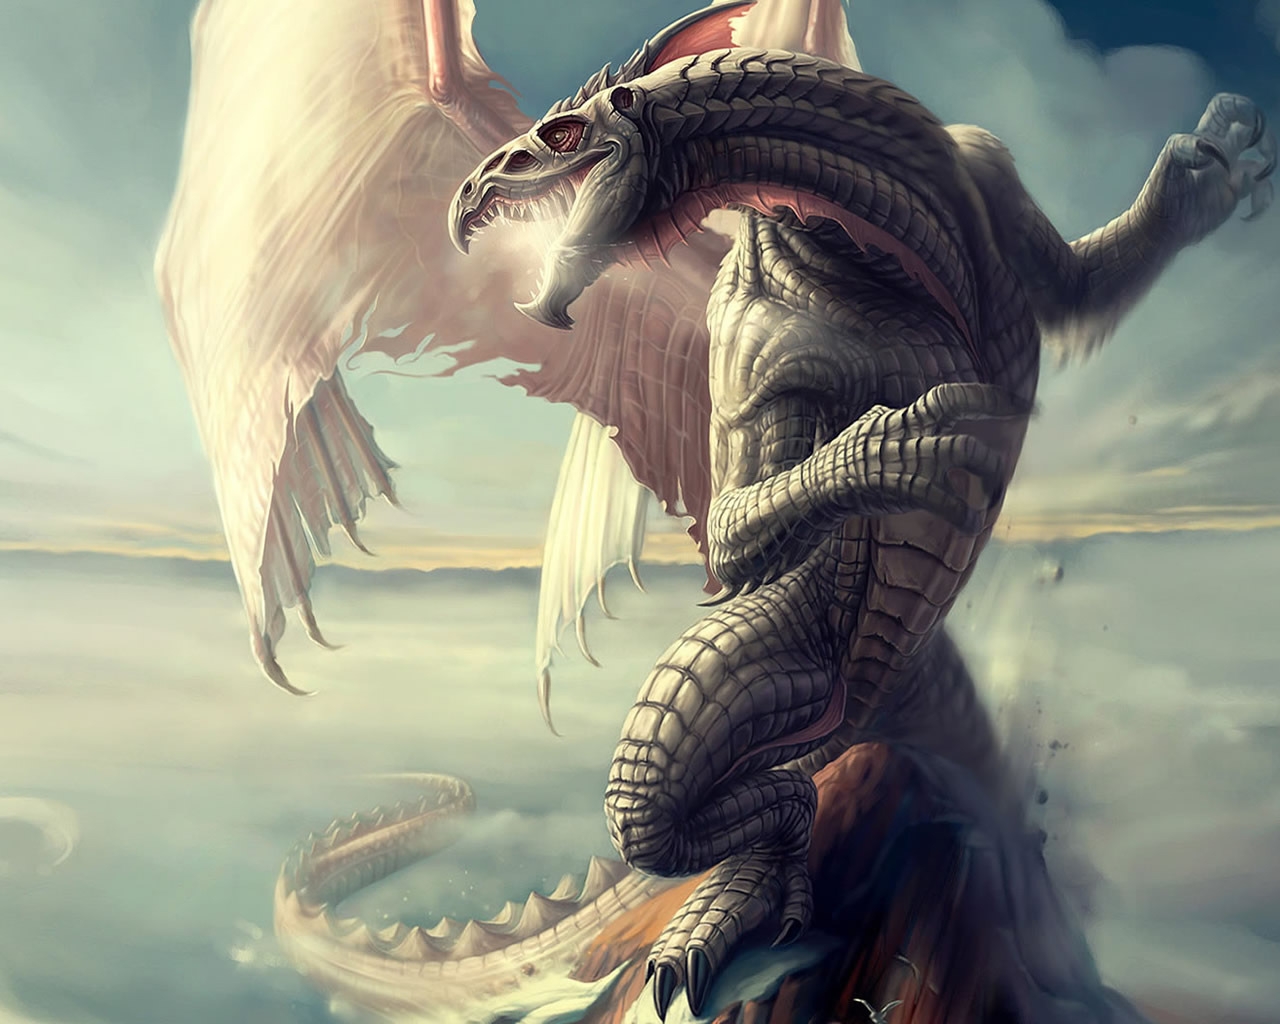 Epic Dragon for 1280 x 1024 resolution